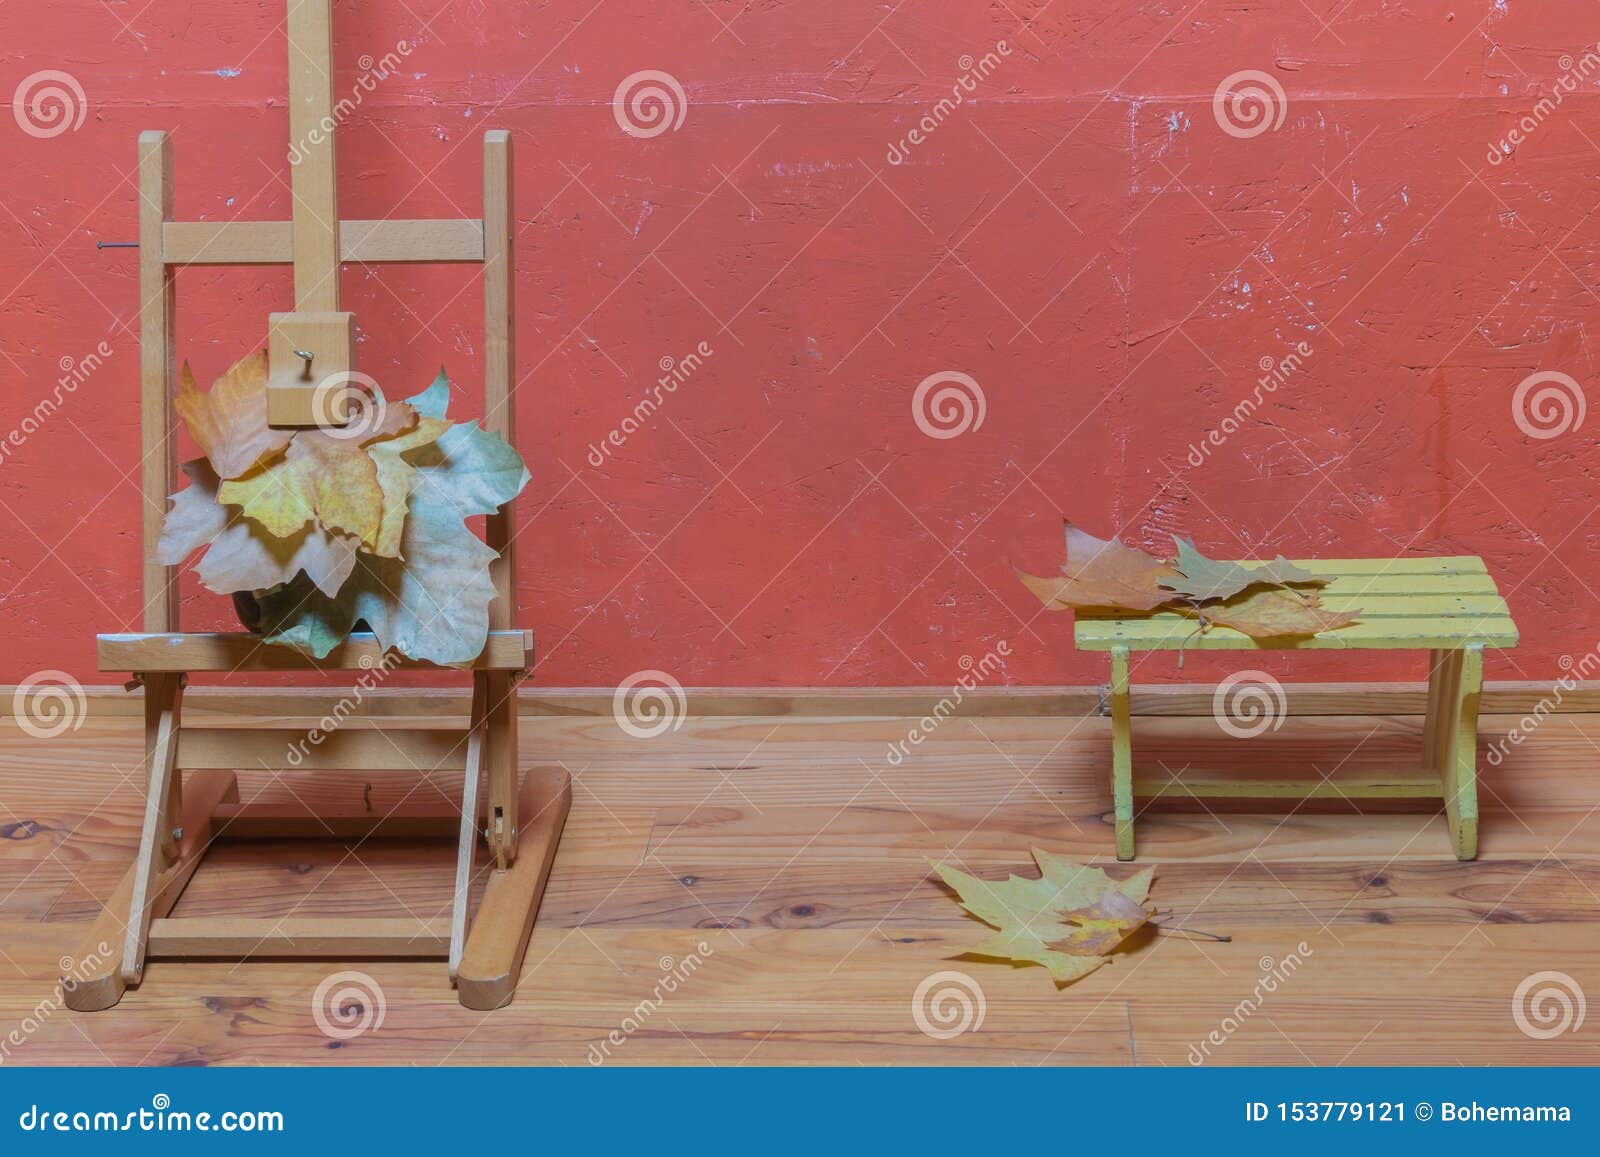 Easel Stand With Dried Leaves Small Bench And Dried Leaves On